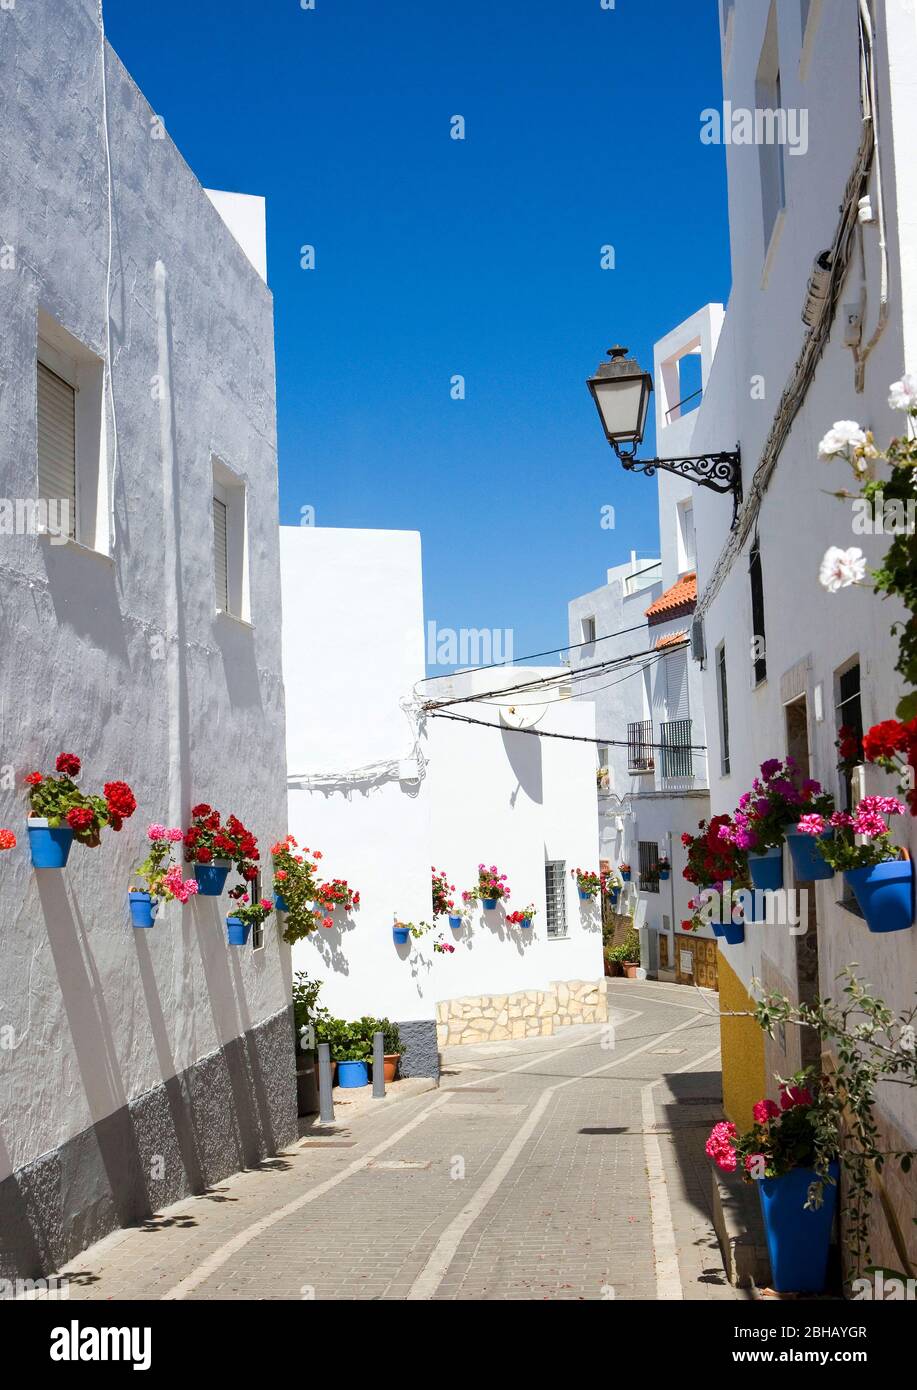 12 Fun things to do in Conil de la Frontera, Spain - Amused by Andalucia